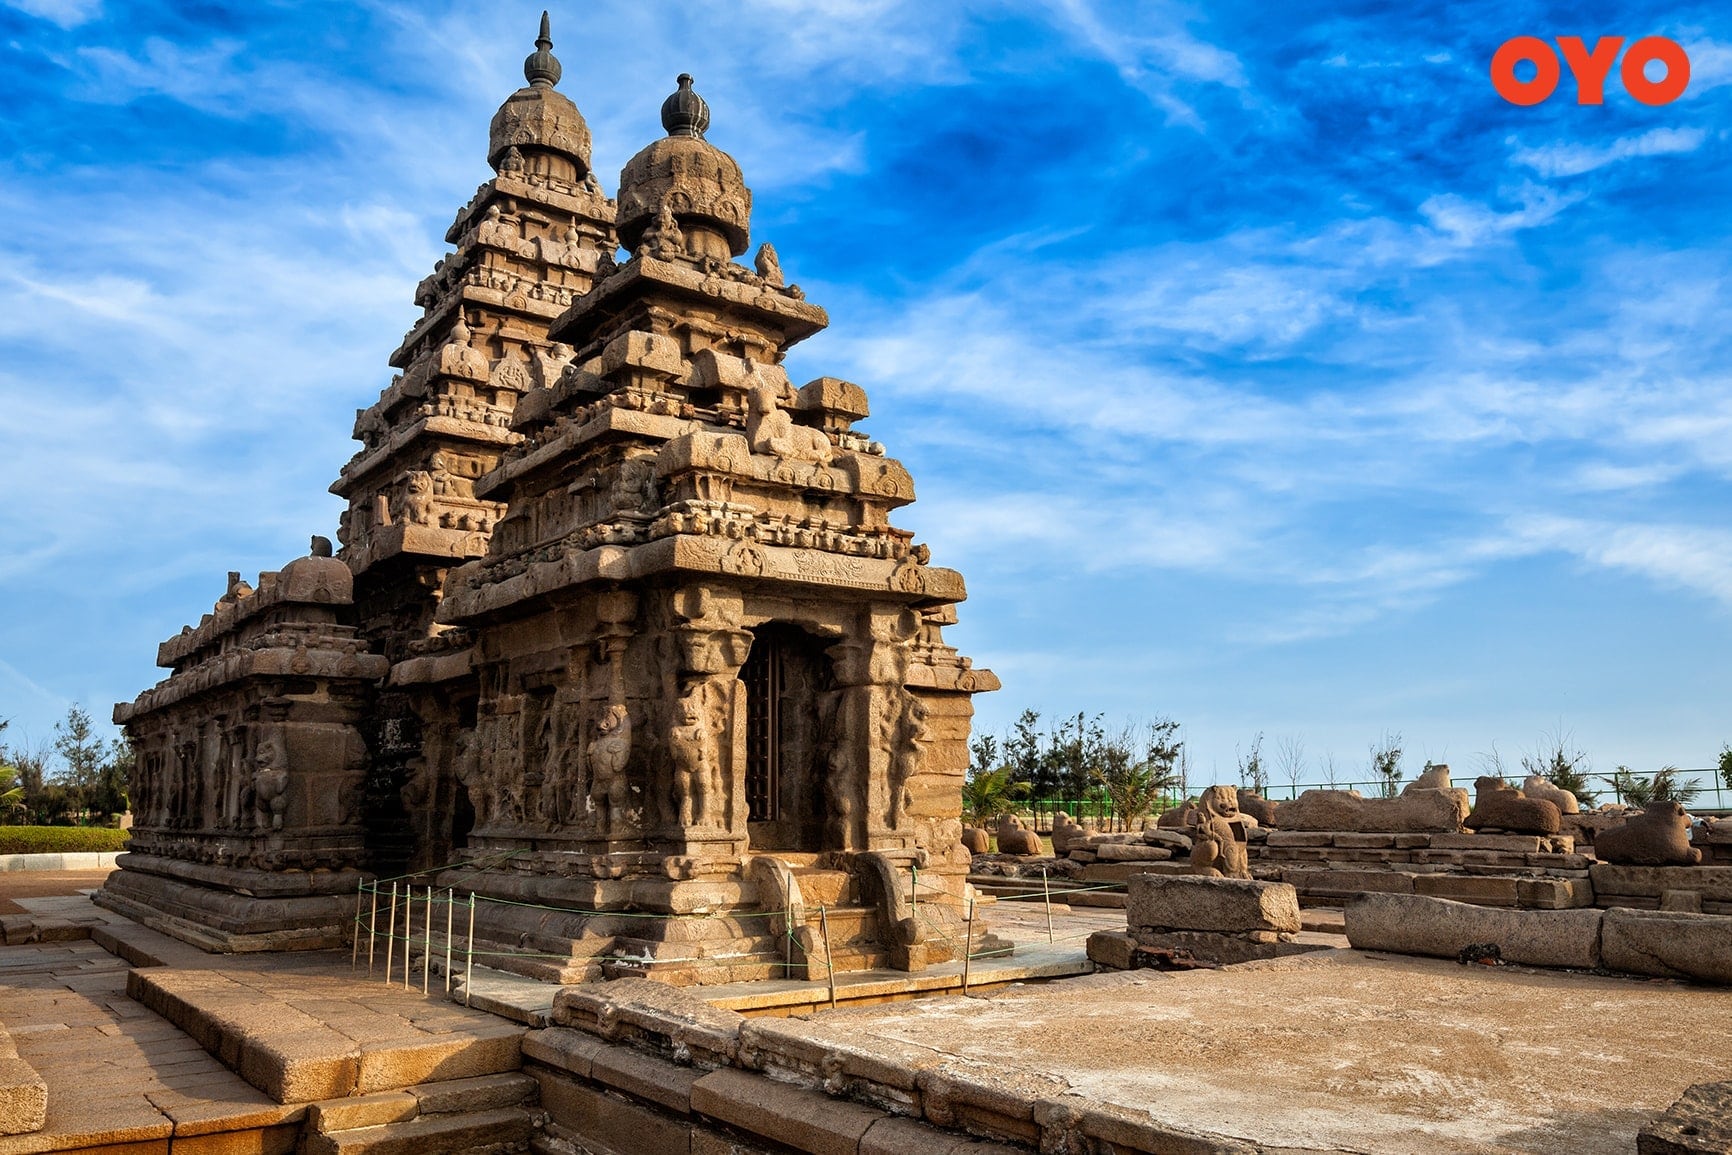 16 MOST FAMOUS HISTORICAL PLACES IN INDIA THAT YOU NEED TO VISIT [2018